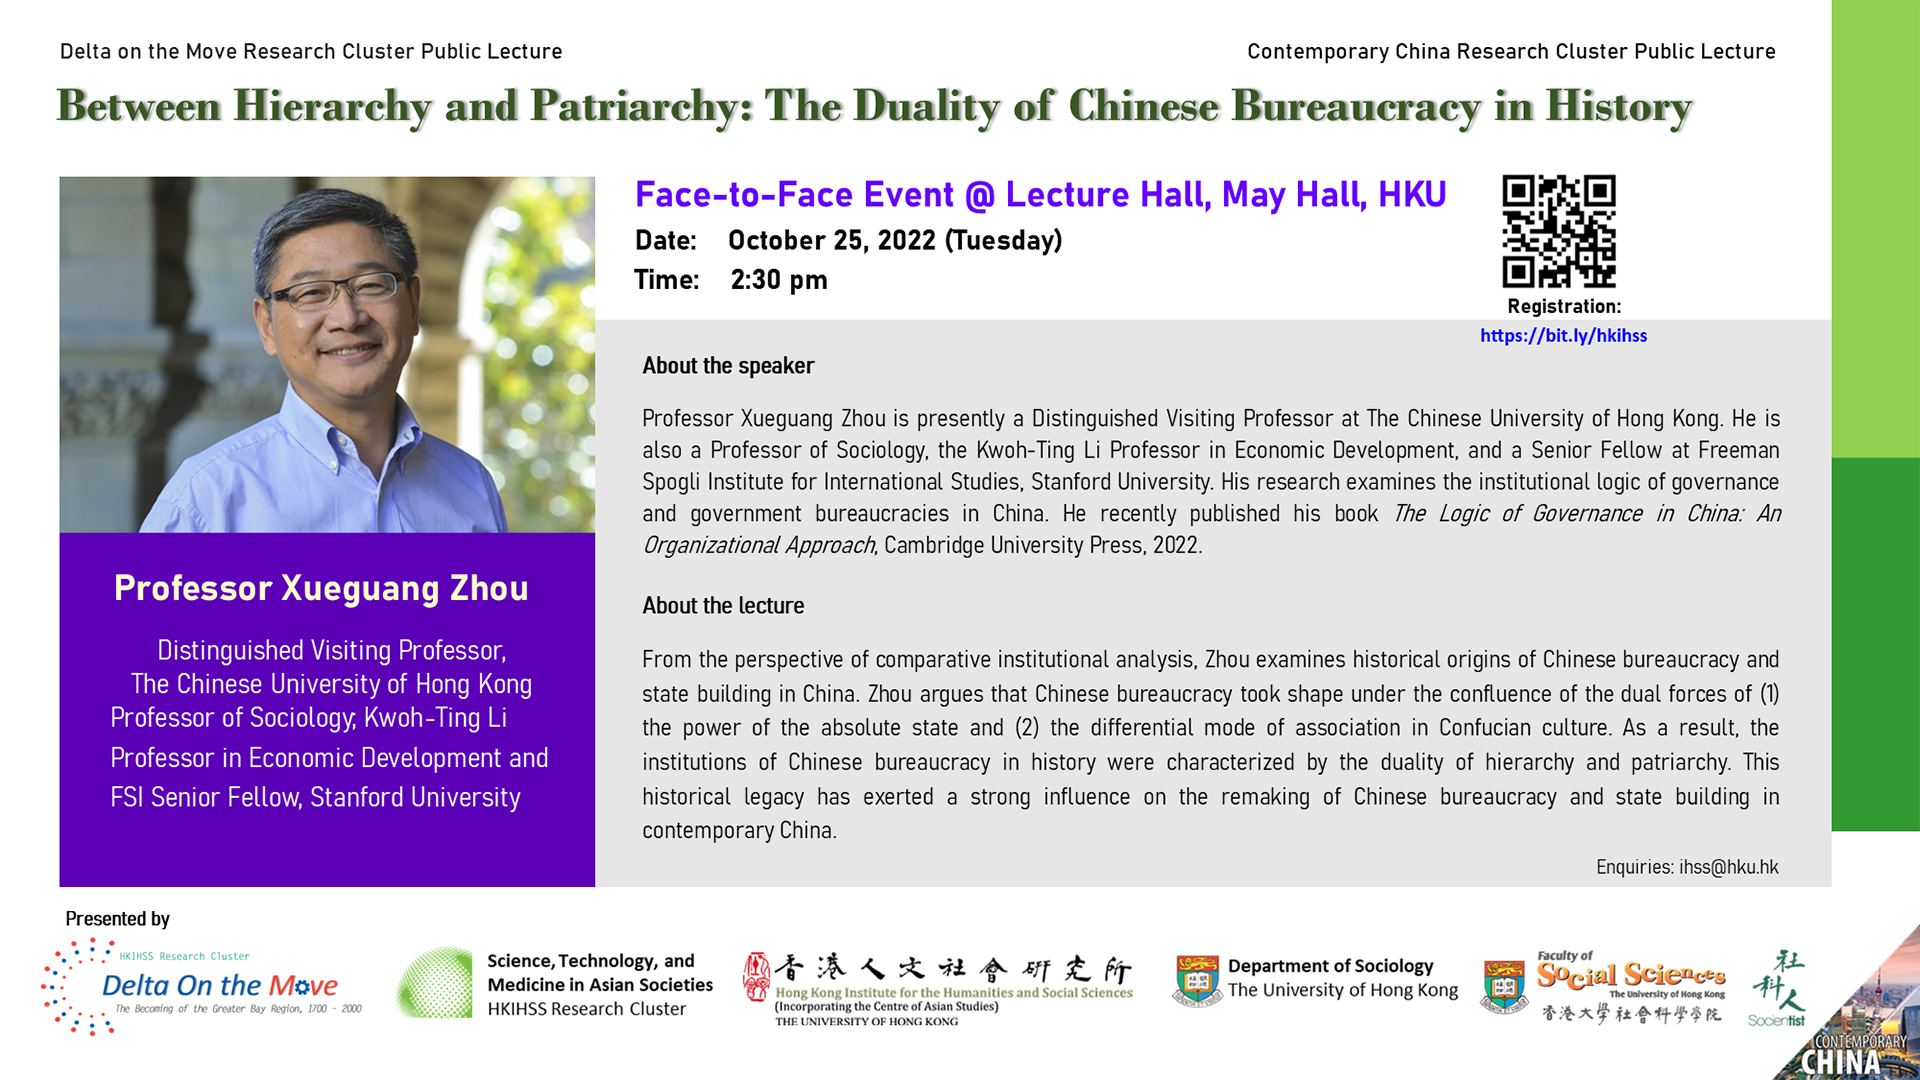 Delta on the Move Lecture Series “Between Hierarchy and Patriarchy: The Duality of Chinese Bureaucracy in History